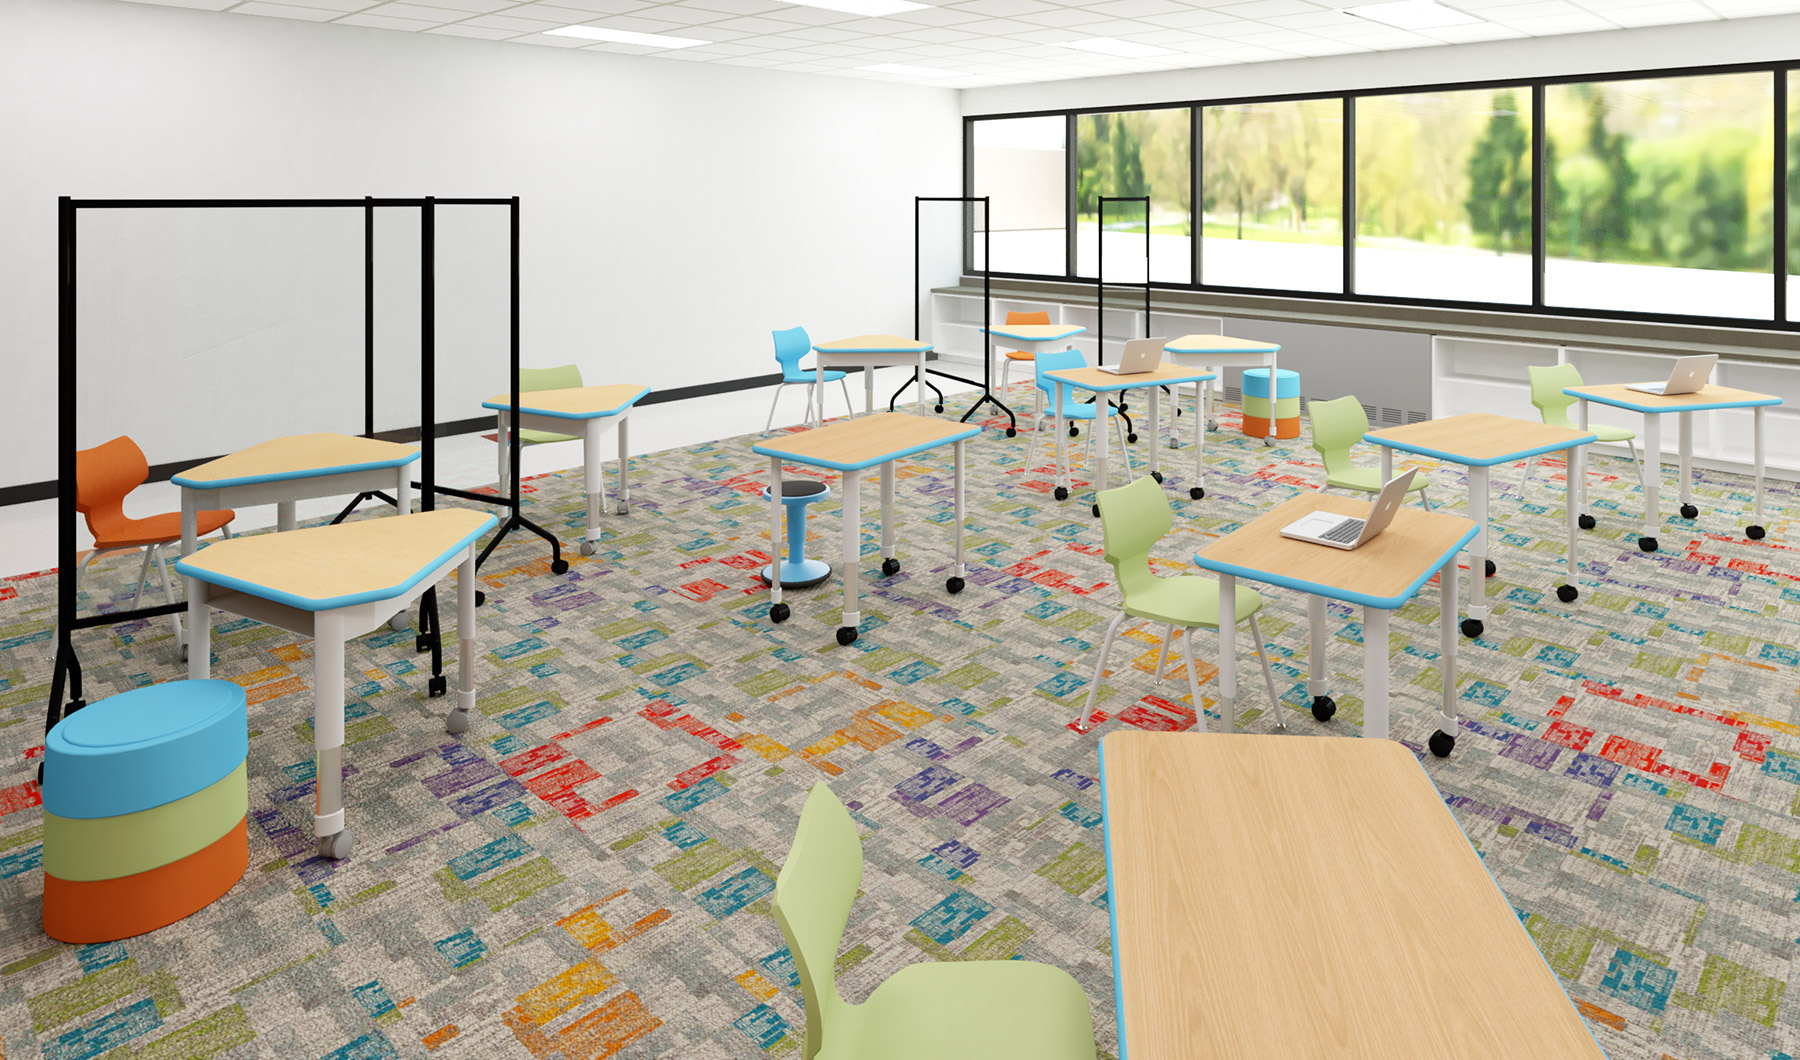 School Spaces Designed for Social Distancing - Classroom